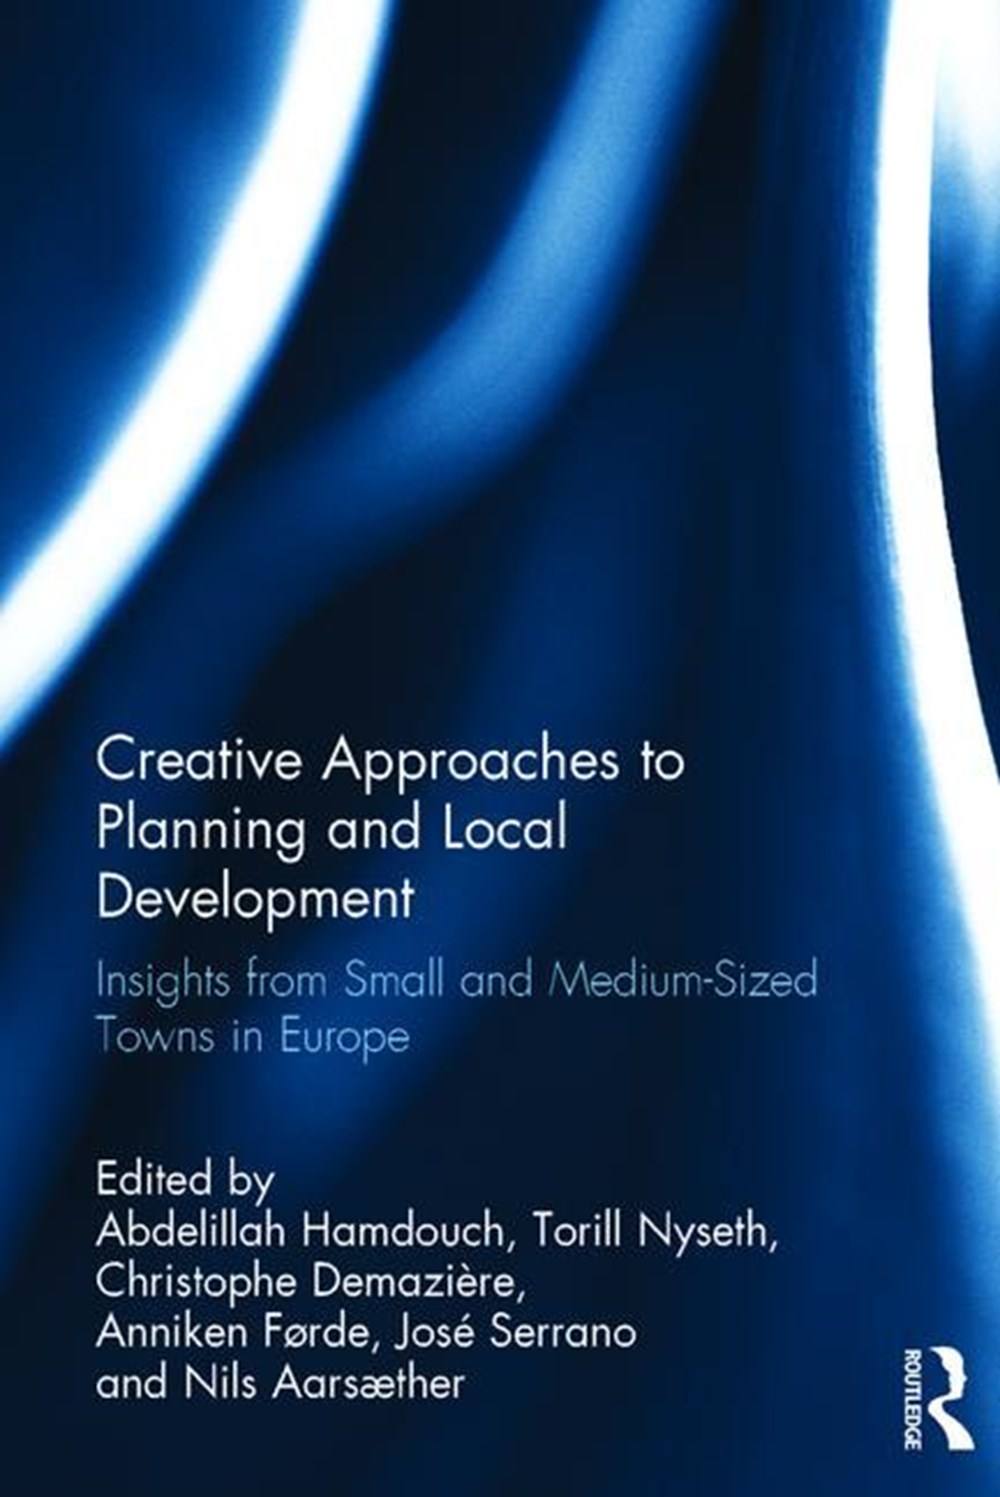 Creative Approaches to Planning and Local Development: Insights from Small and Medium-Sized Towns in